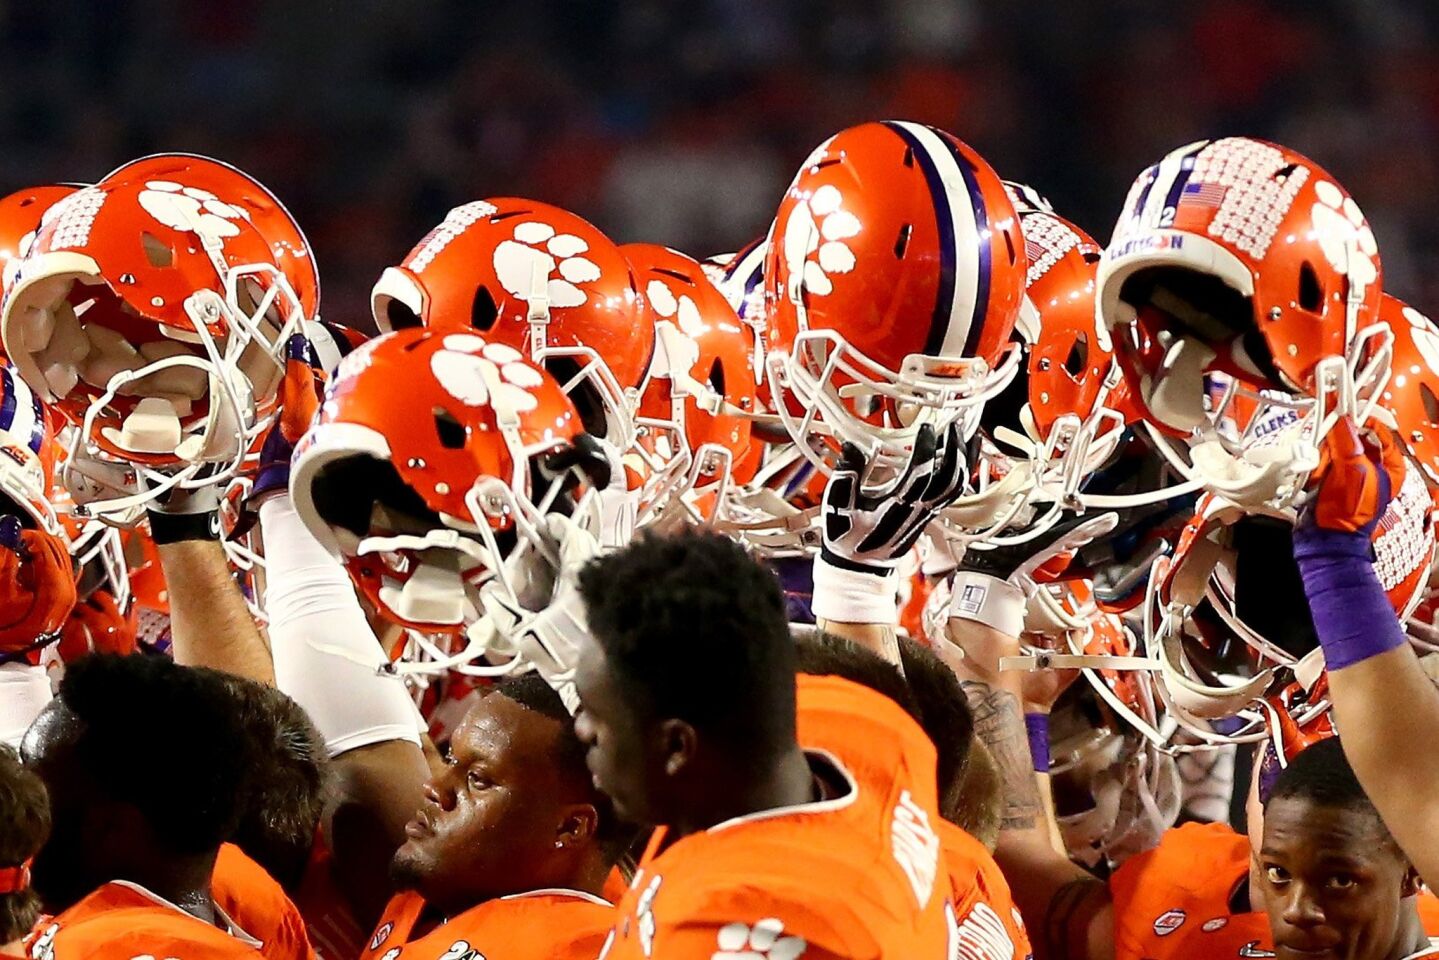 Clemson players huddle before taking on the Alabama Crimson Tide in the 2016 College Football Playoff championship game.